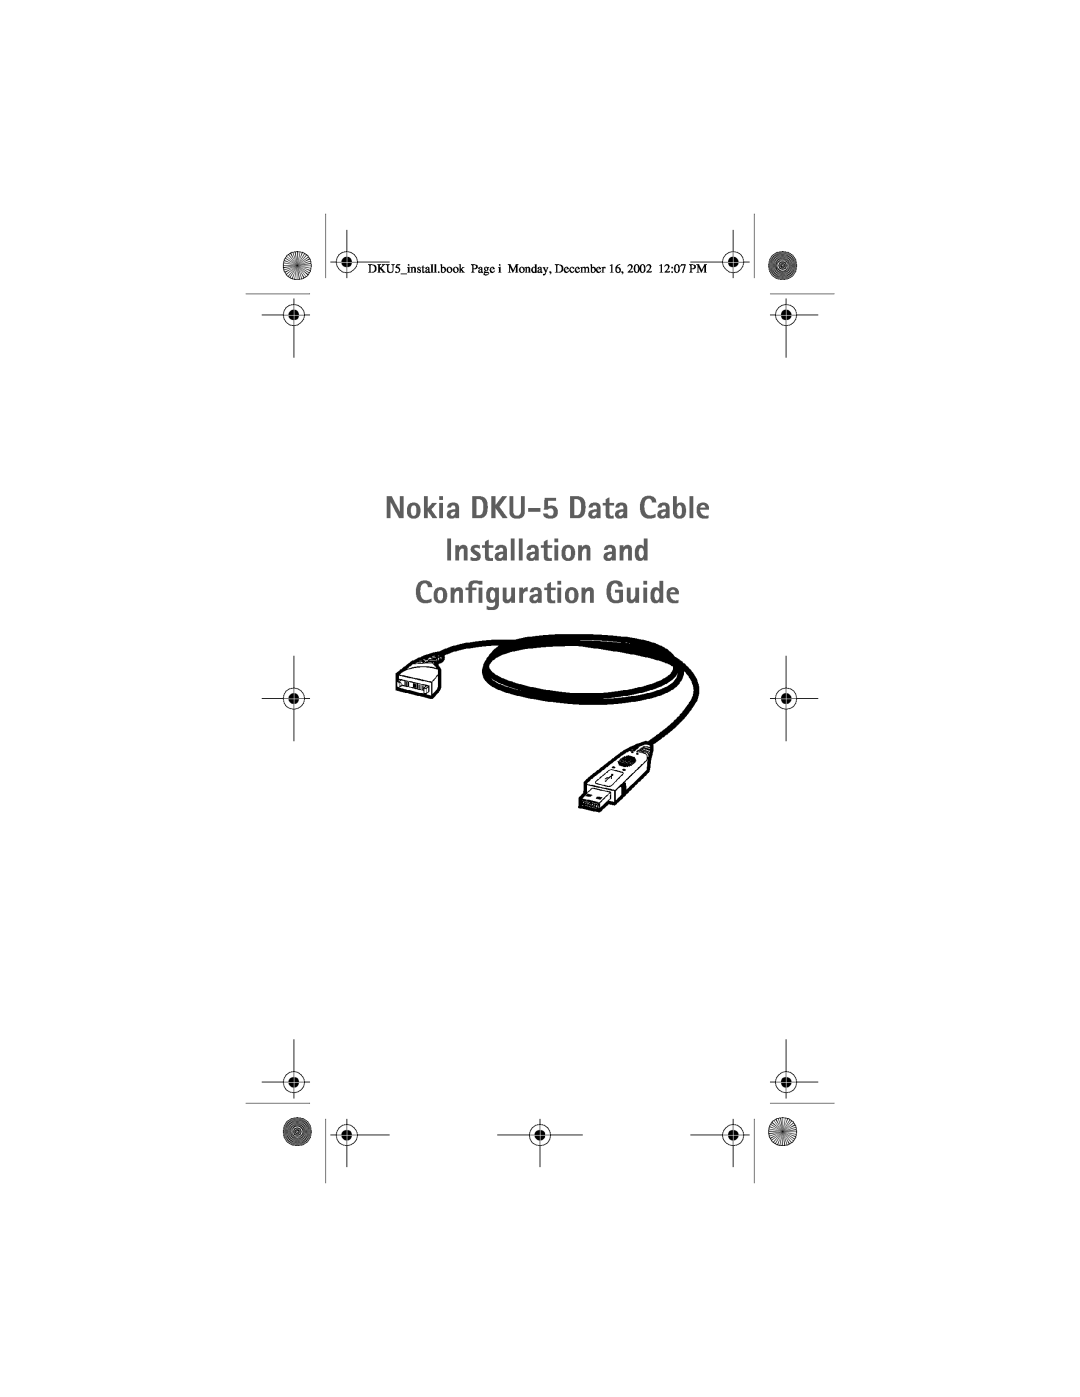 Nokia manual Nokia DKU-5Data Cable Installation and, Configuration Guide 